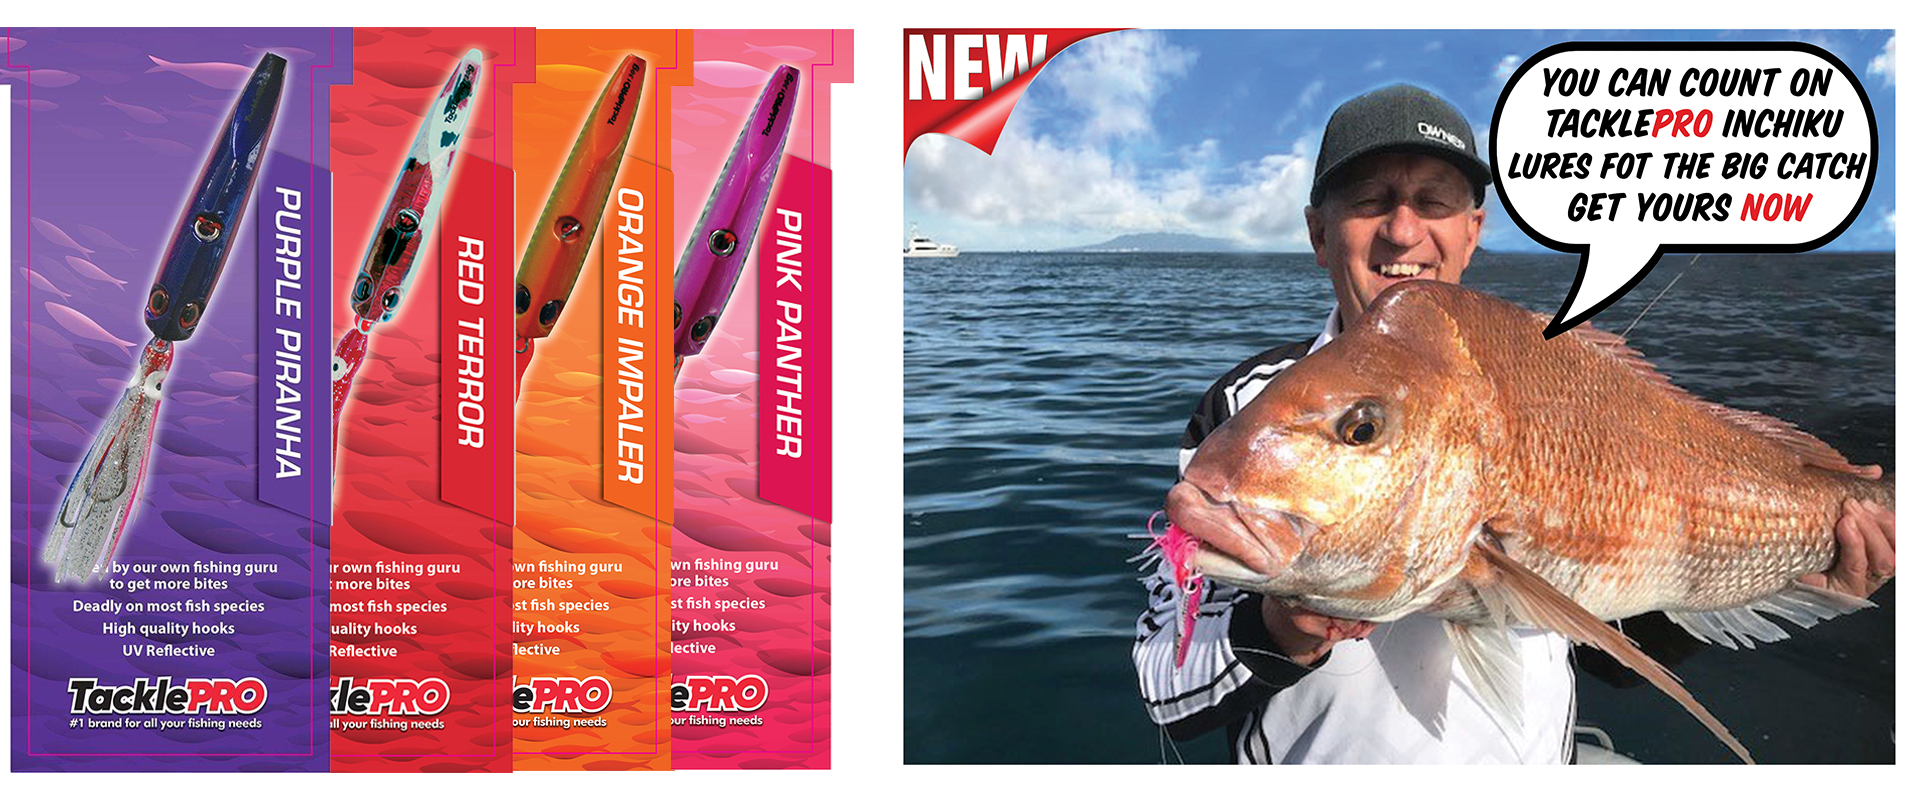 TacklePRO NZ – #1 Fishing Brand For All Your Fishing Needs!